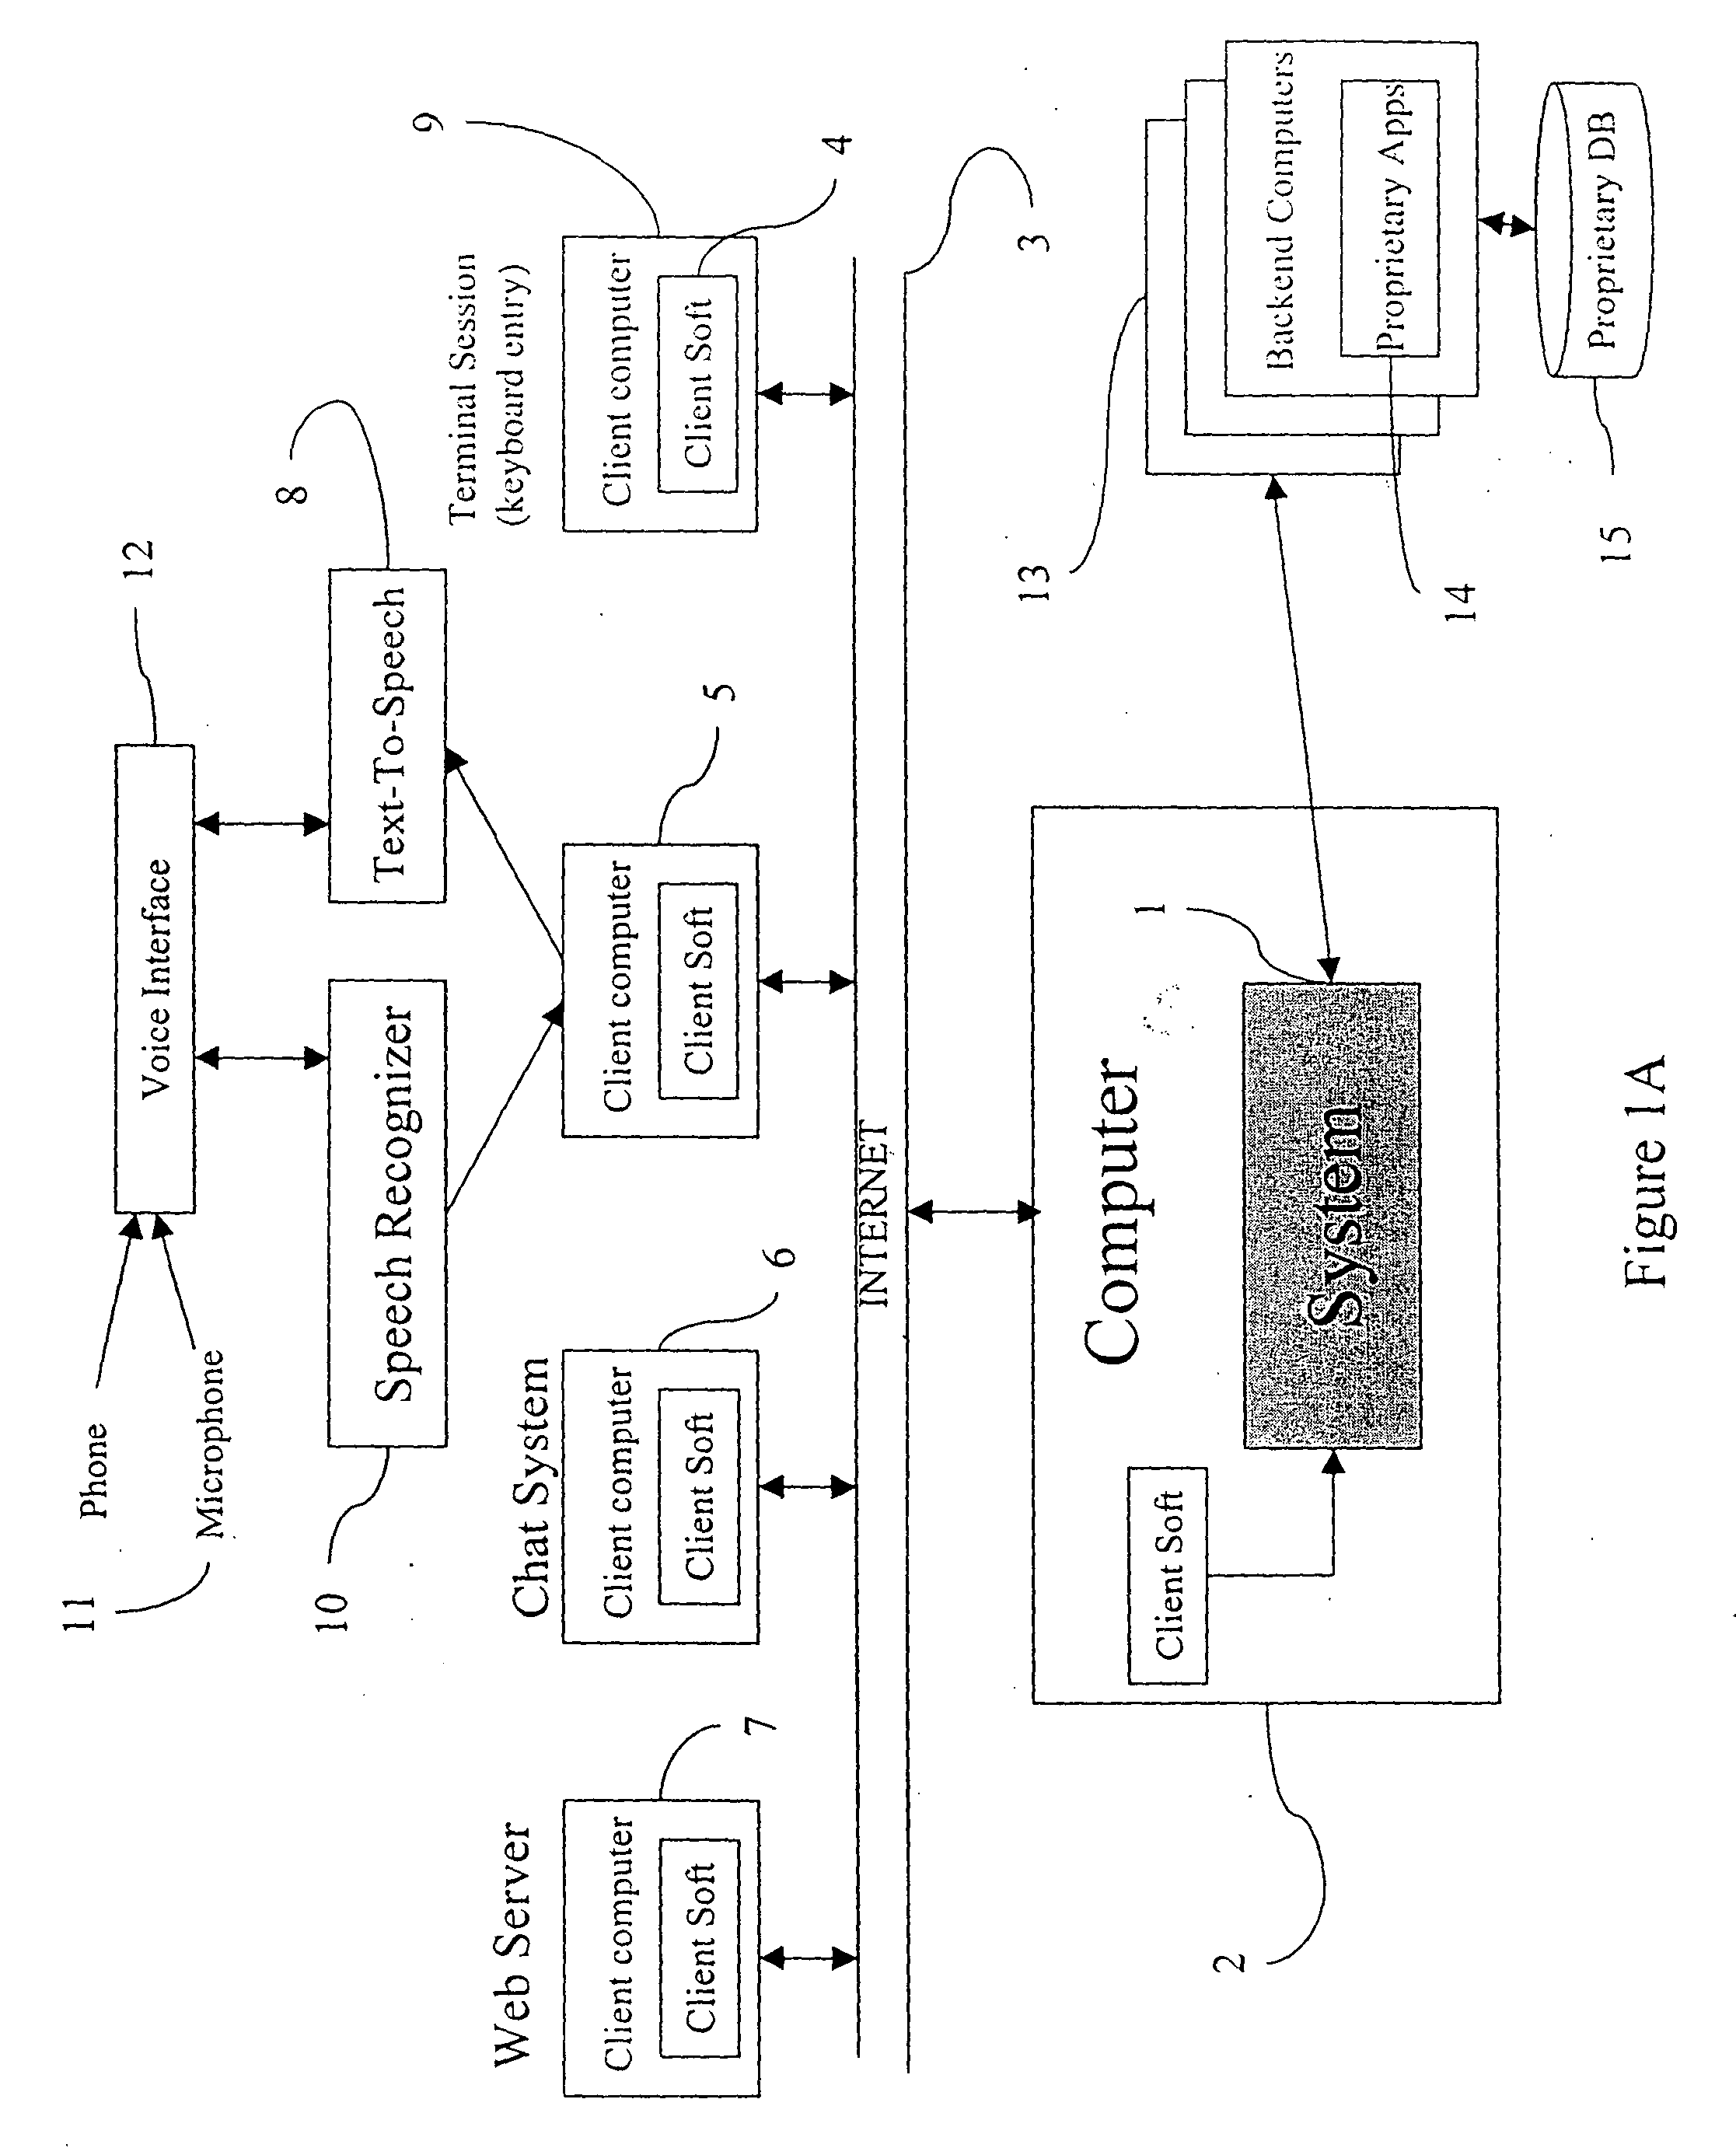 Apparatus and methods for developing conversational applications